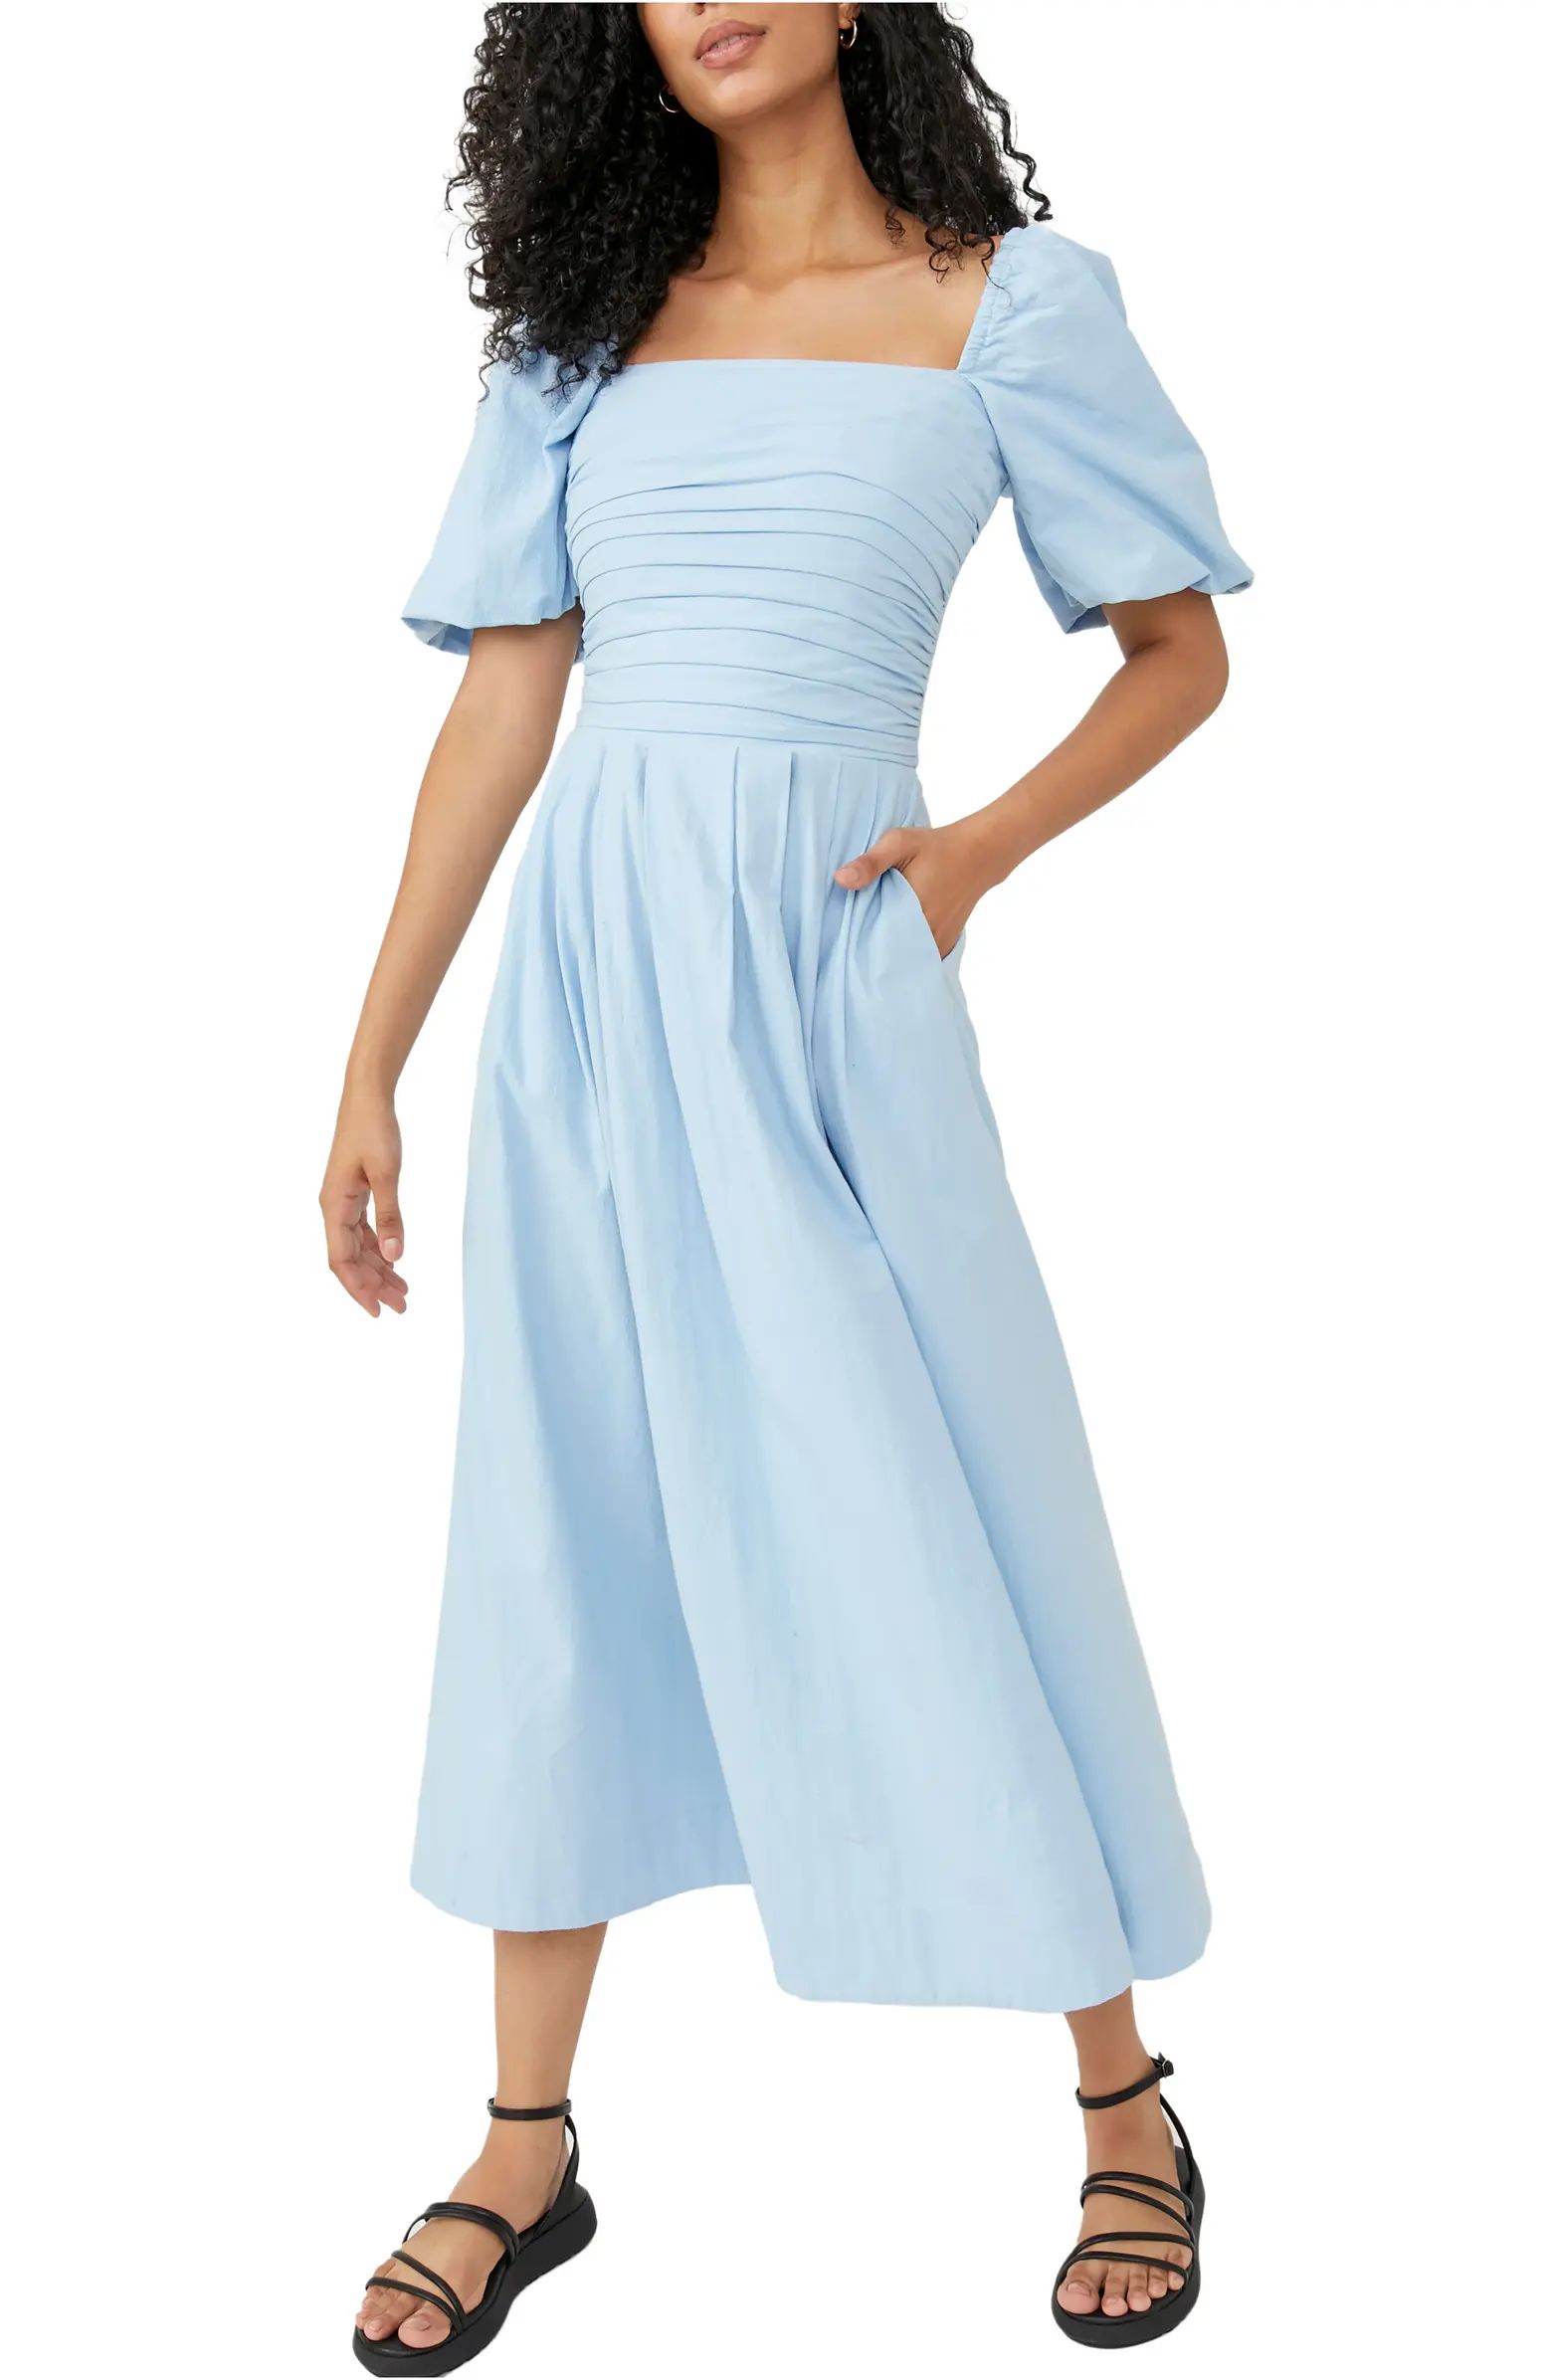 Ain't She a Beaut Puff Sleeve Ruched Dress | Nordstrom